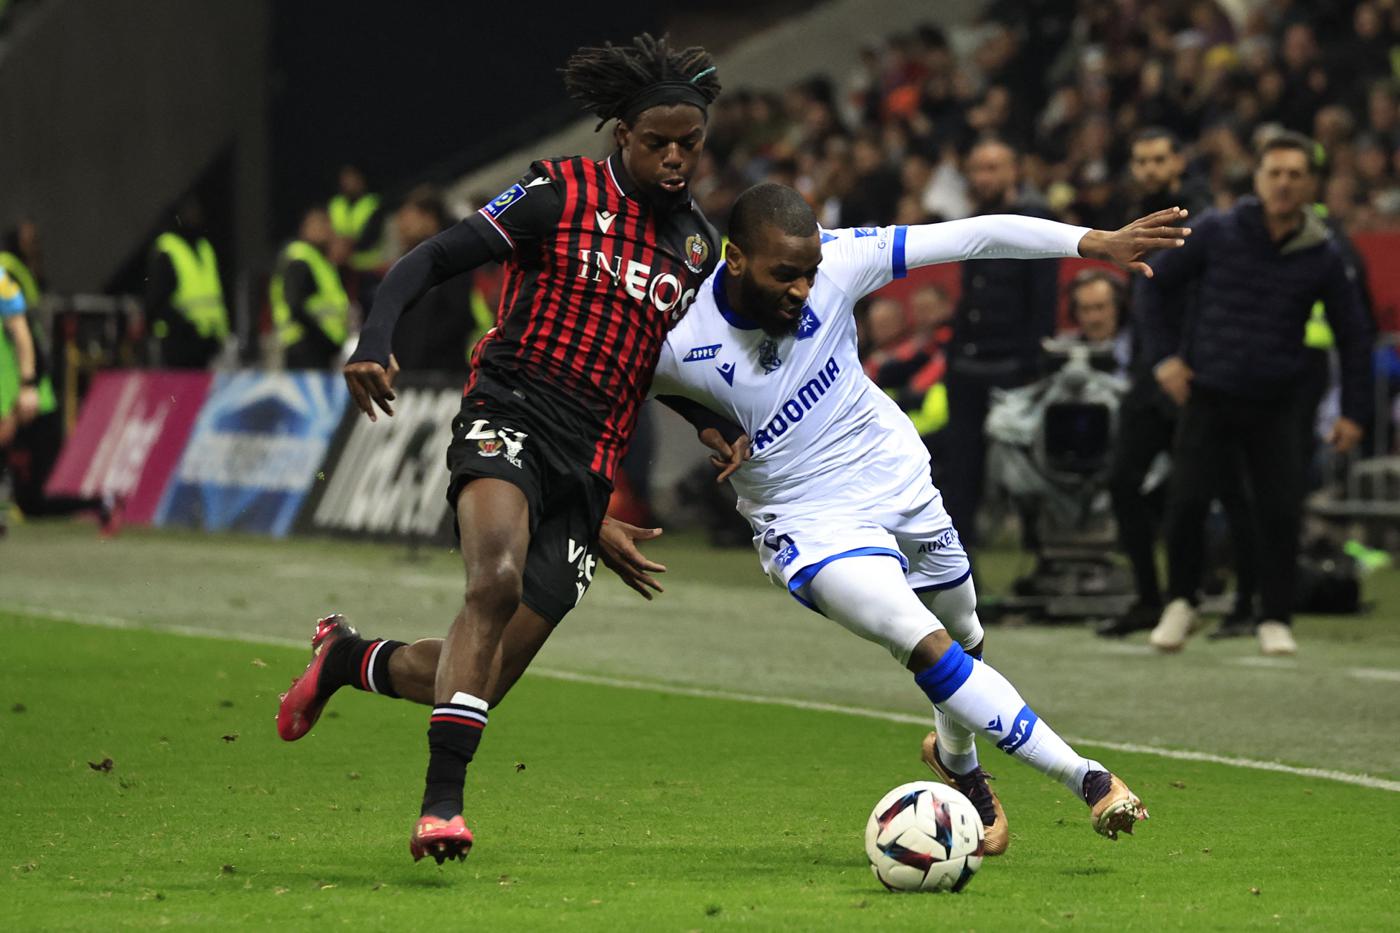 Nice vs Auxerre - 1:1. French Championship, 26th round. Match Review, Statistics